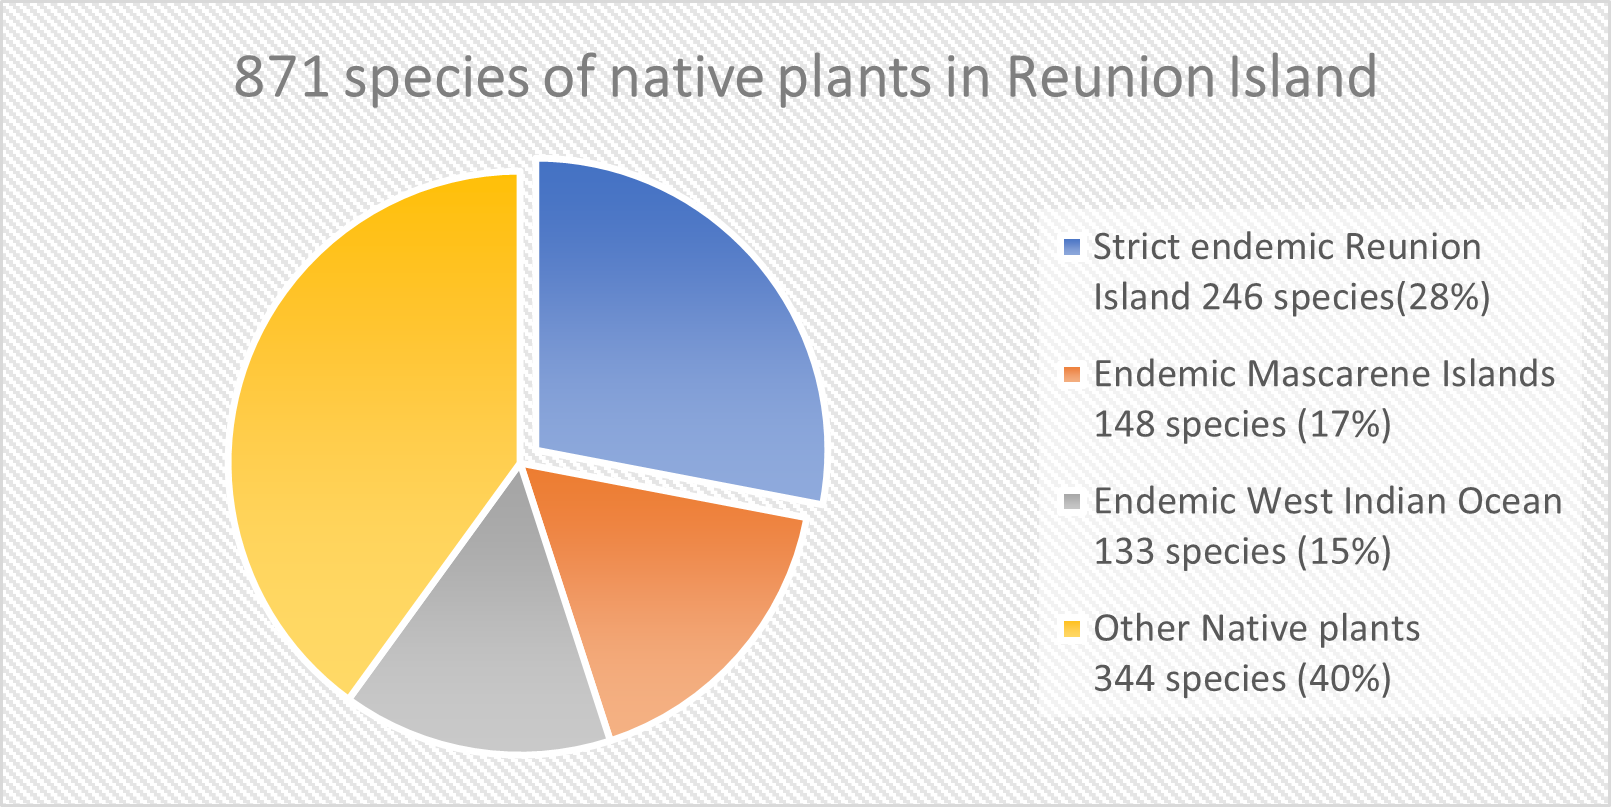 Endemicity status of the native flora of Reunion Island